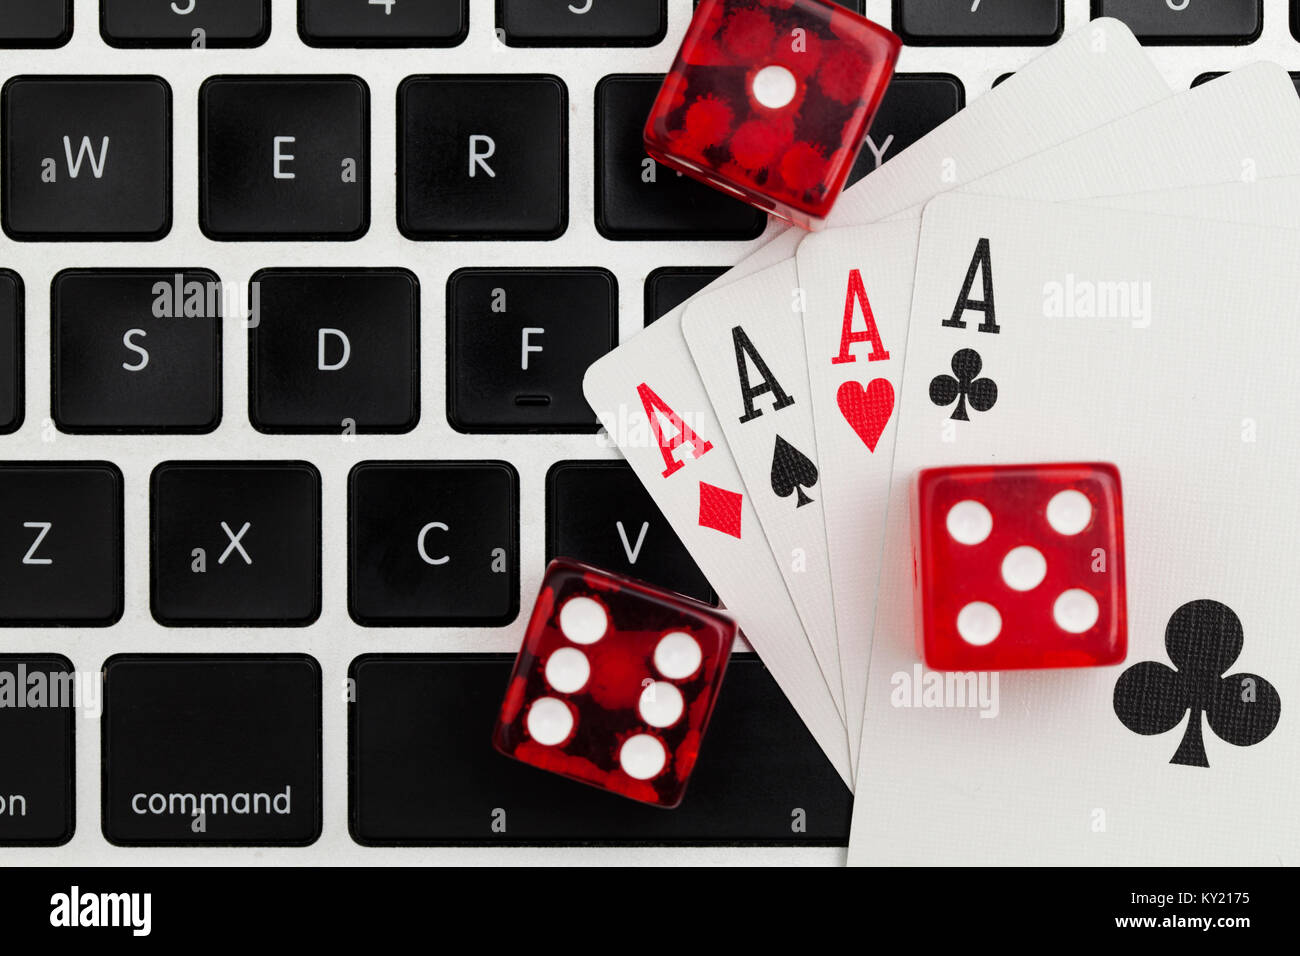 Online gambling. Playing cards and dice on a computer keyboard Stock Photo